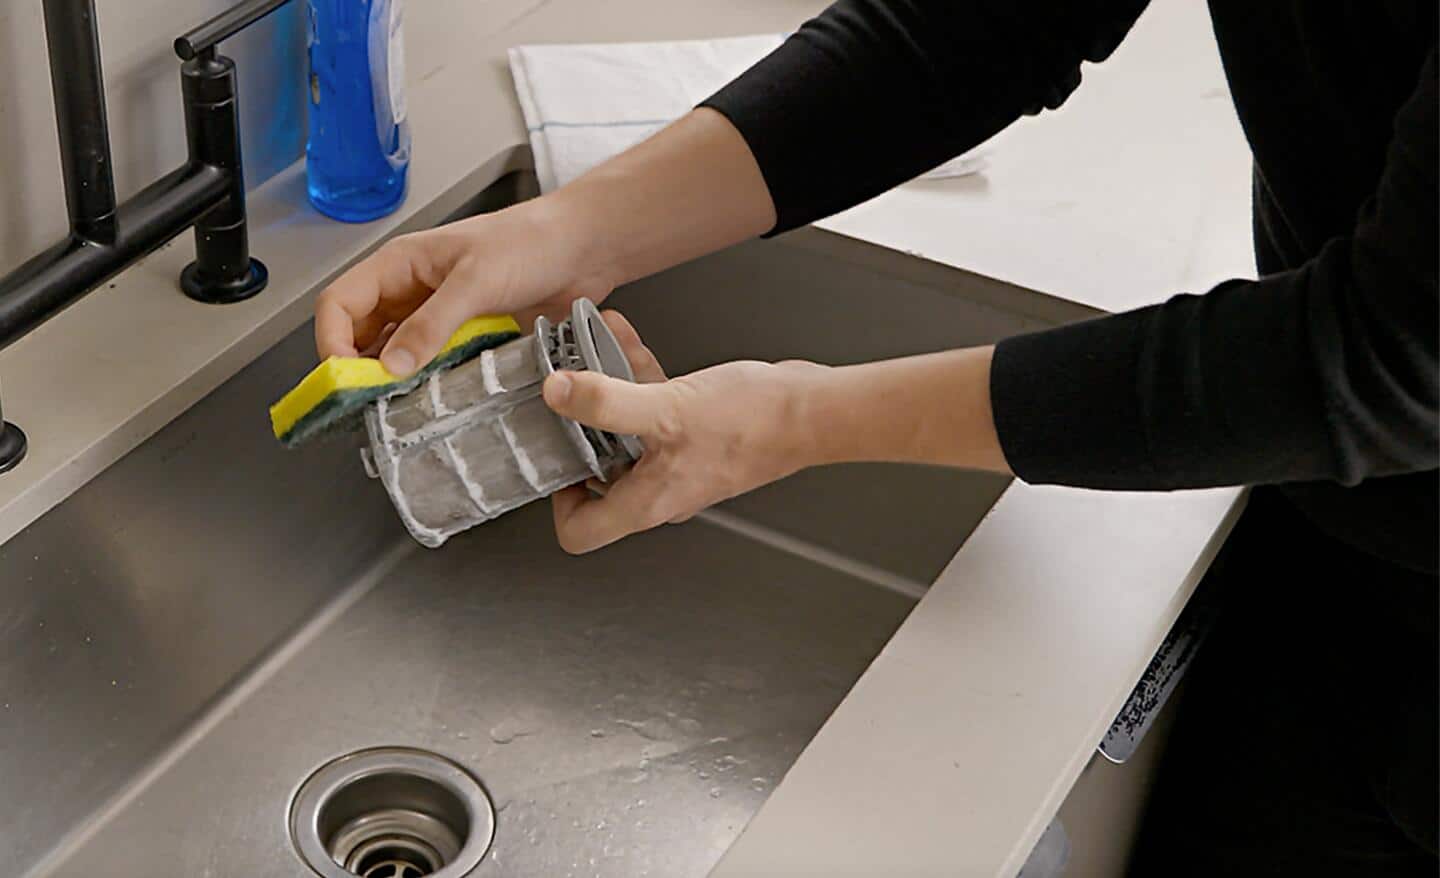 A person washing the dishwasher filter in a sink.